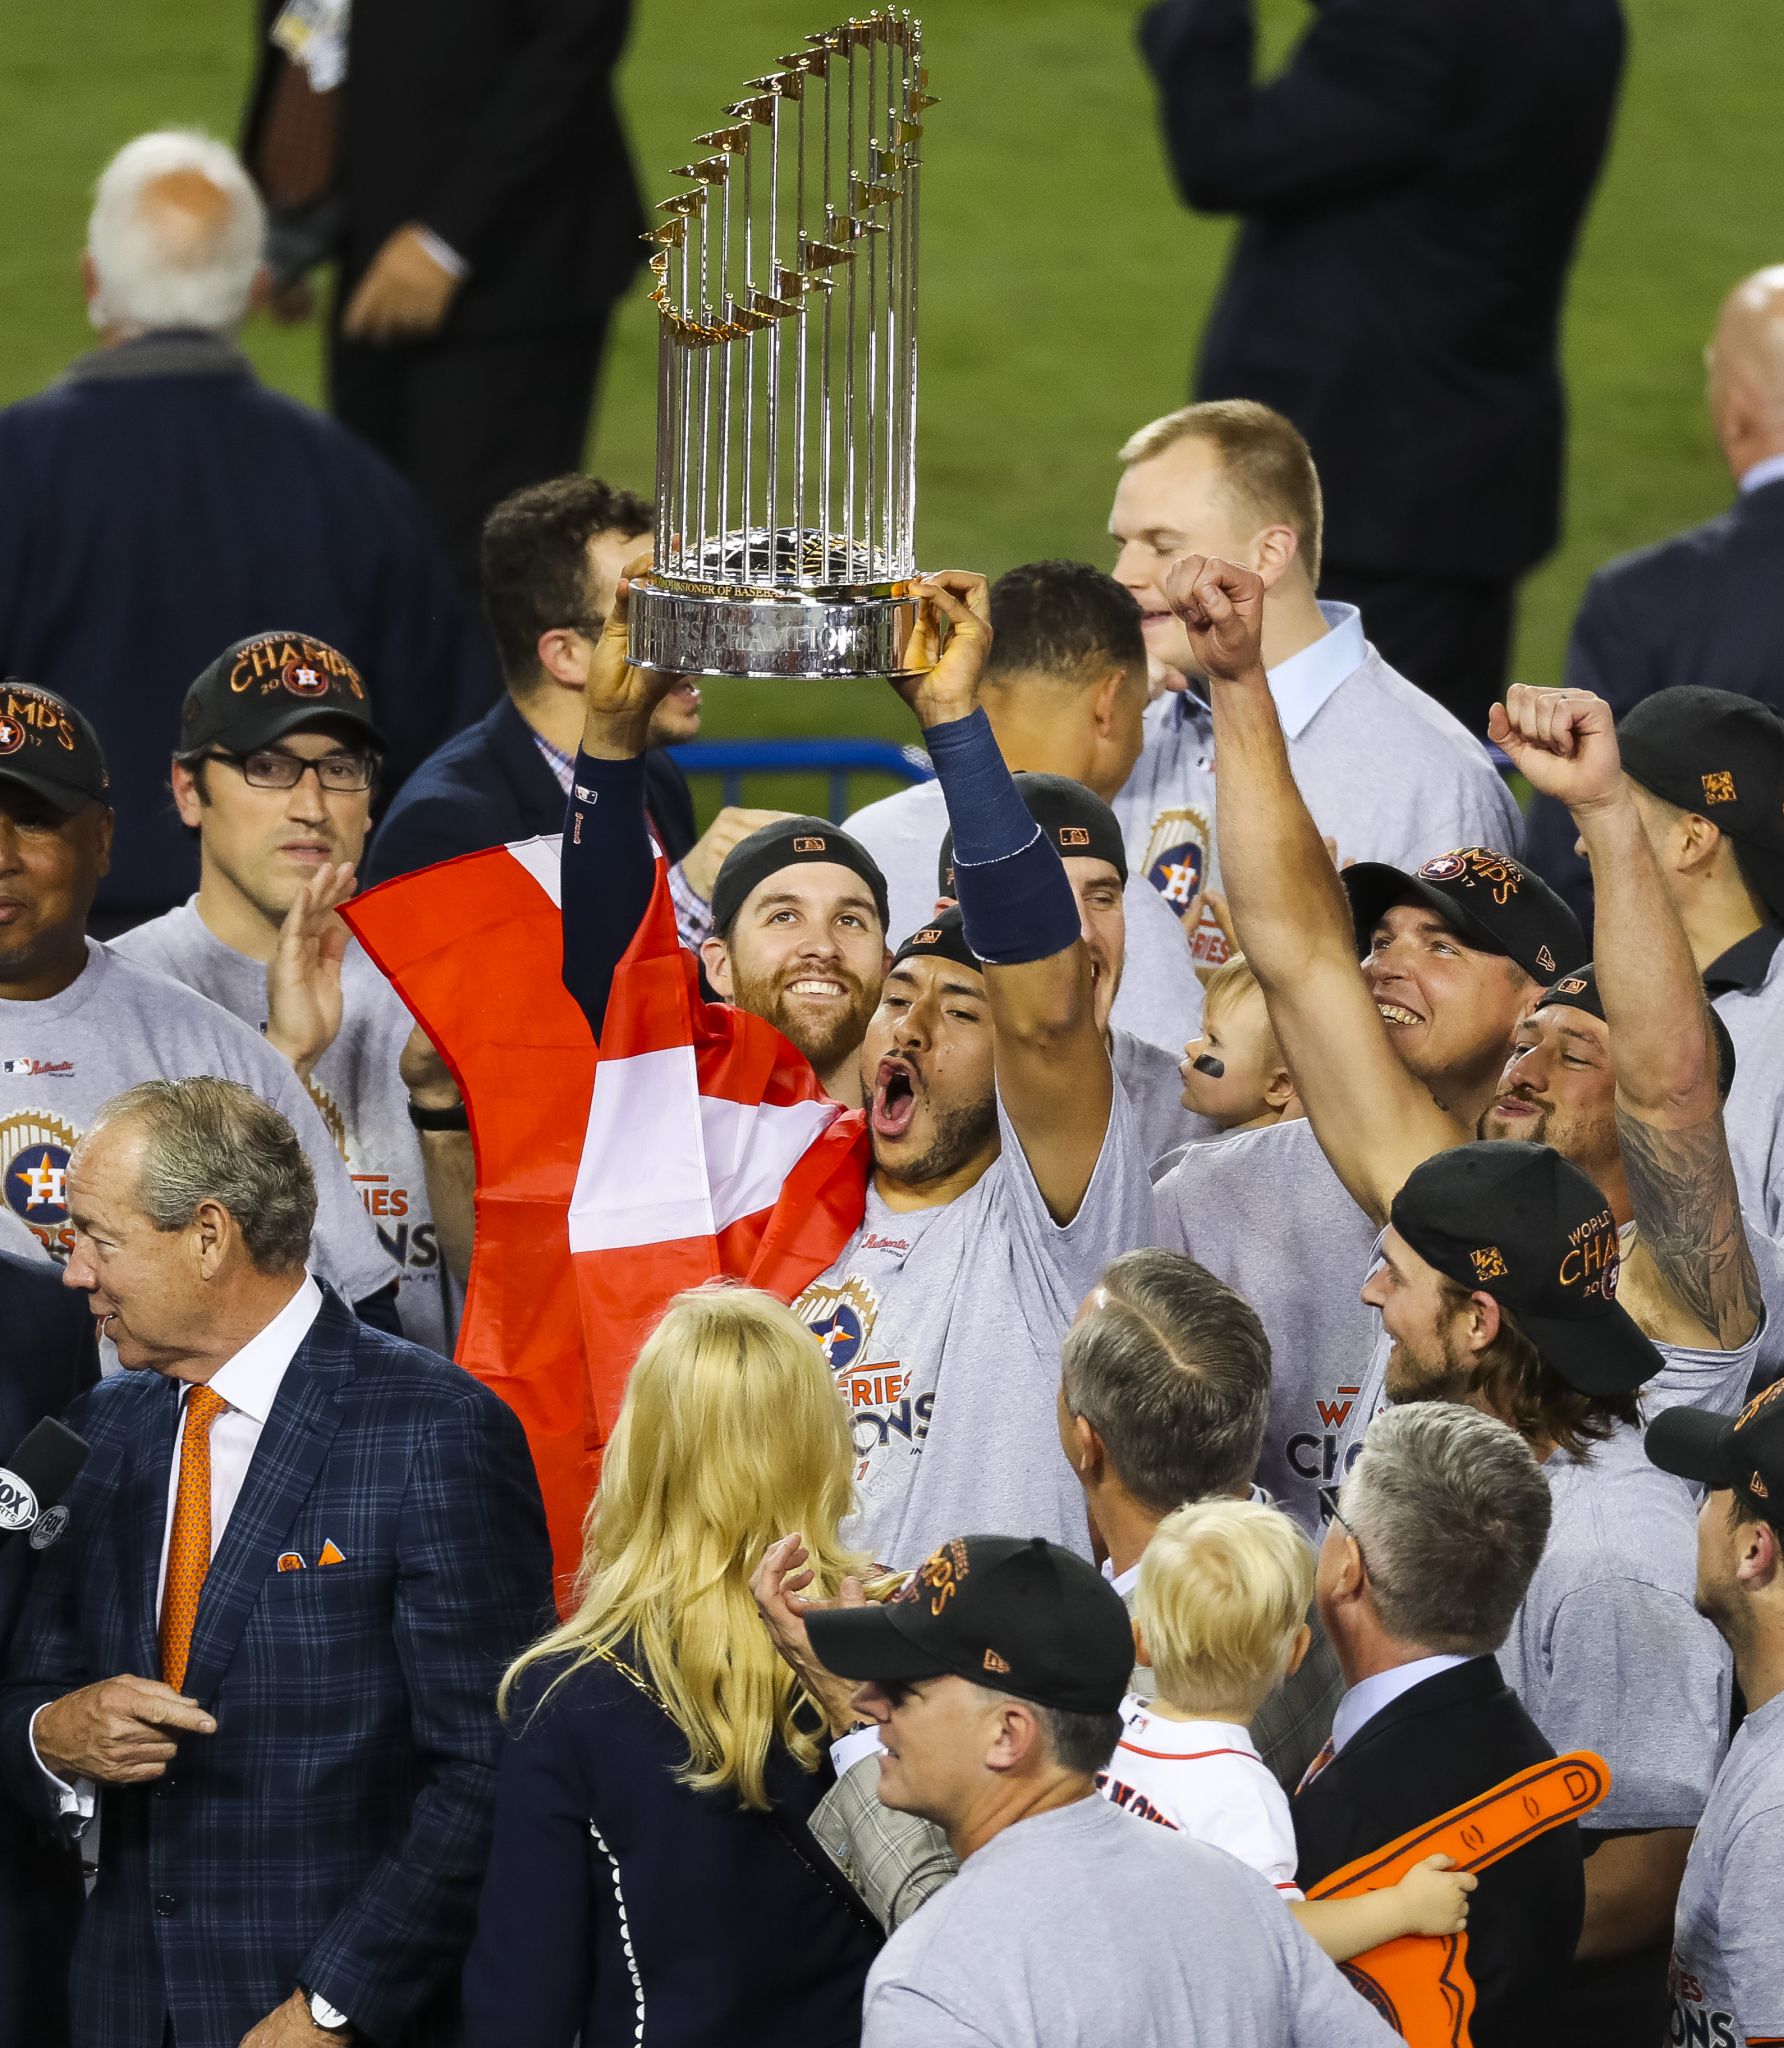 Houston Astros World Series trophy photo op at Minute Maid Park as